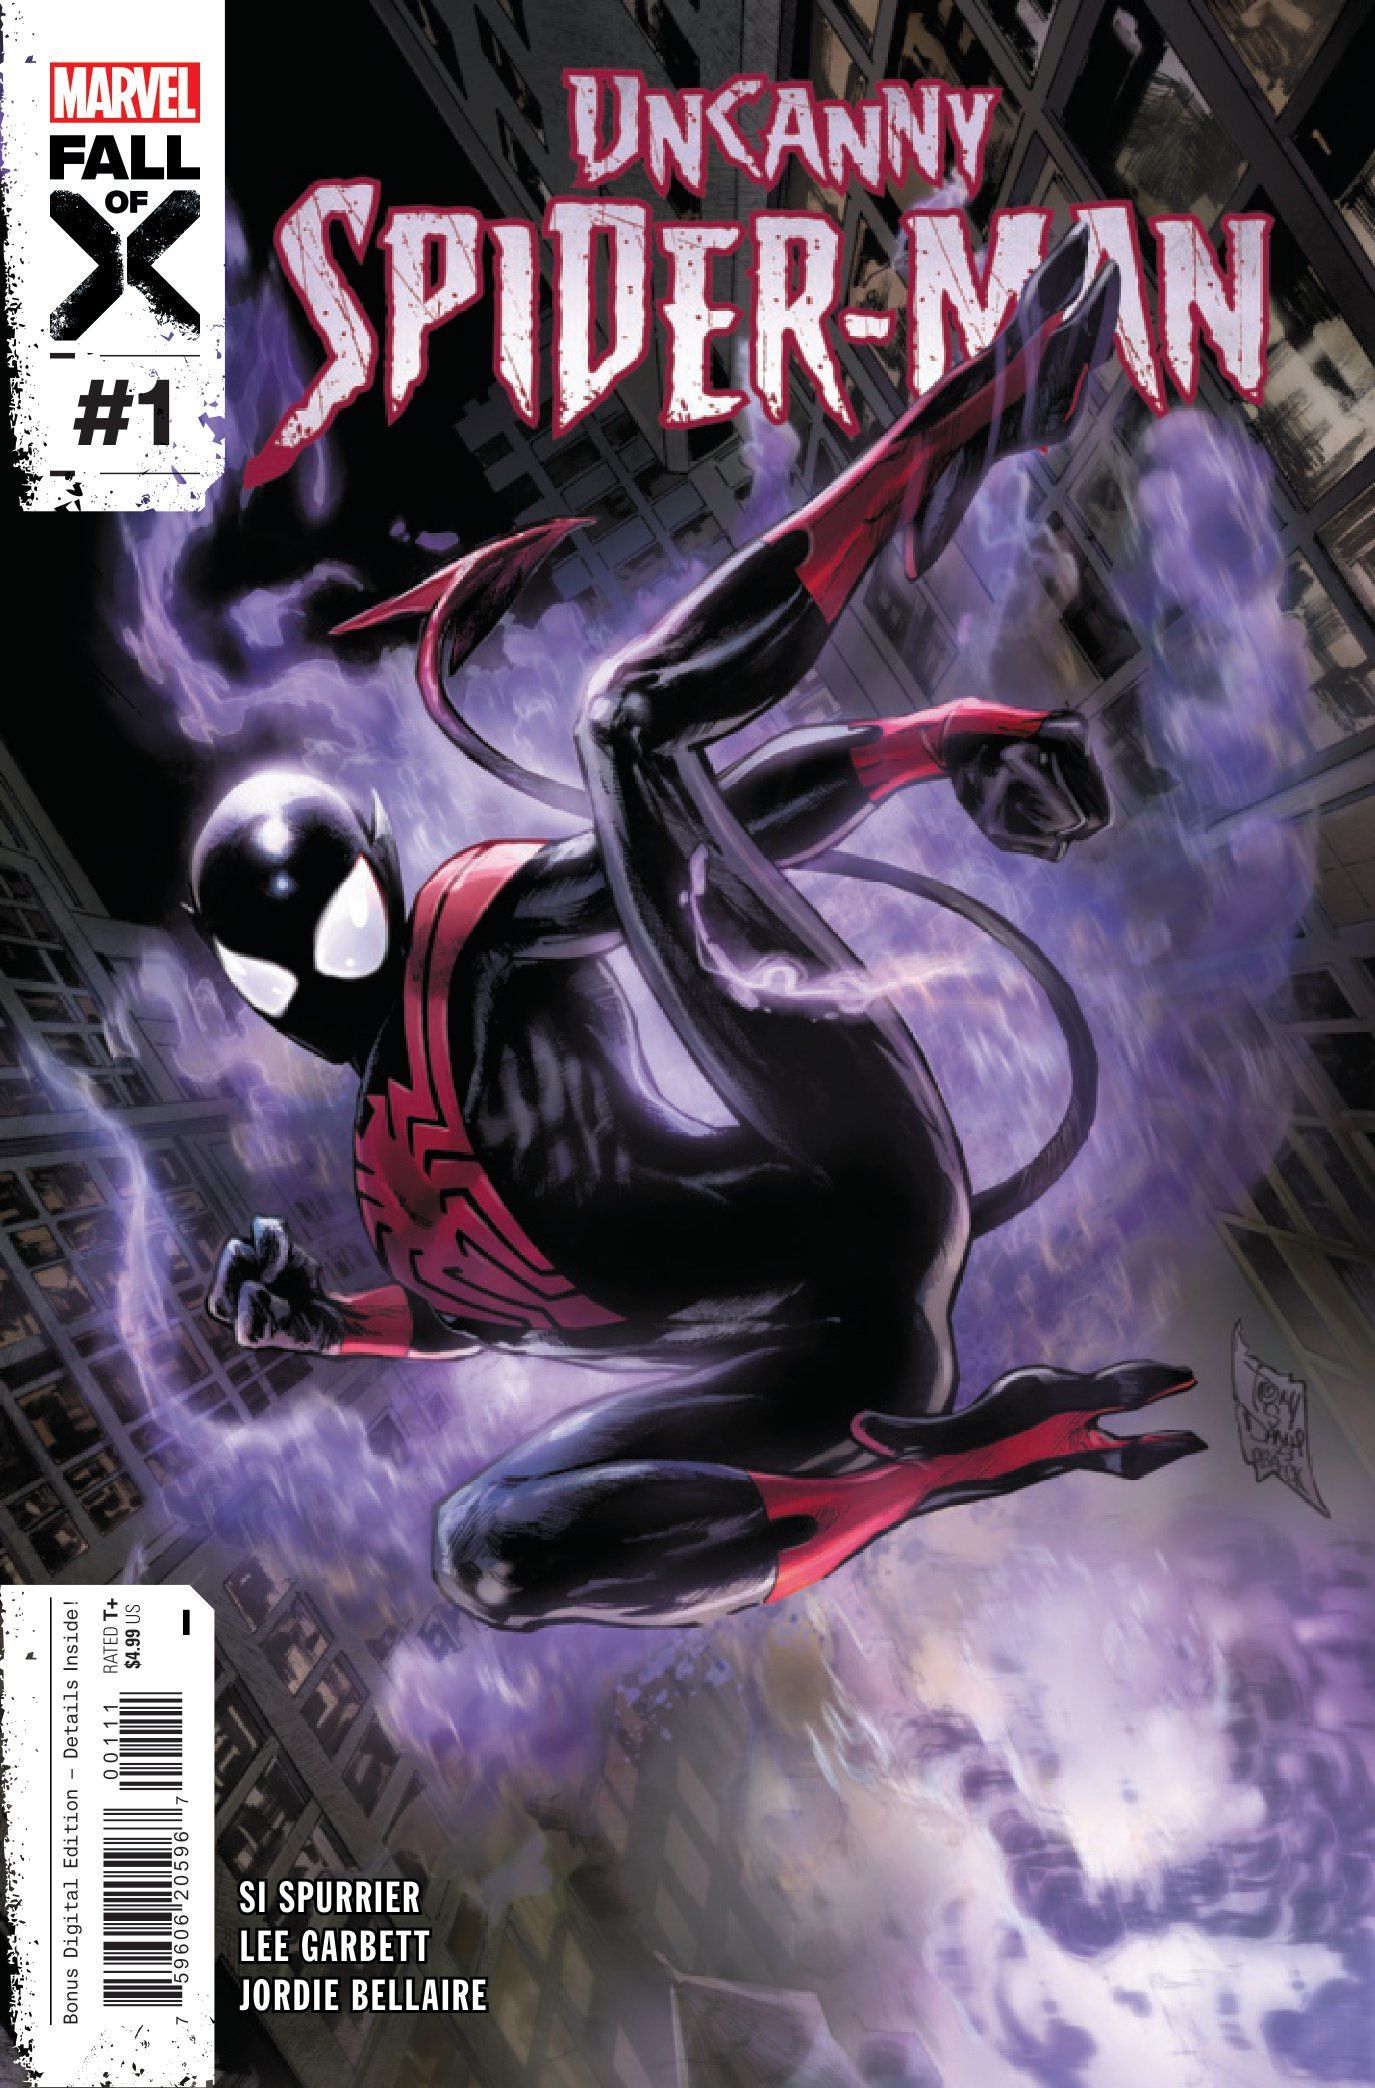 Uncanny Spider-Man #1 ACover by Tony Daniel and Sonia Oback